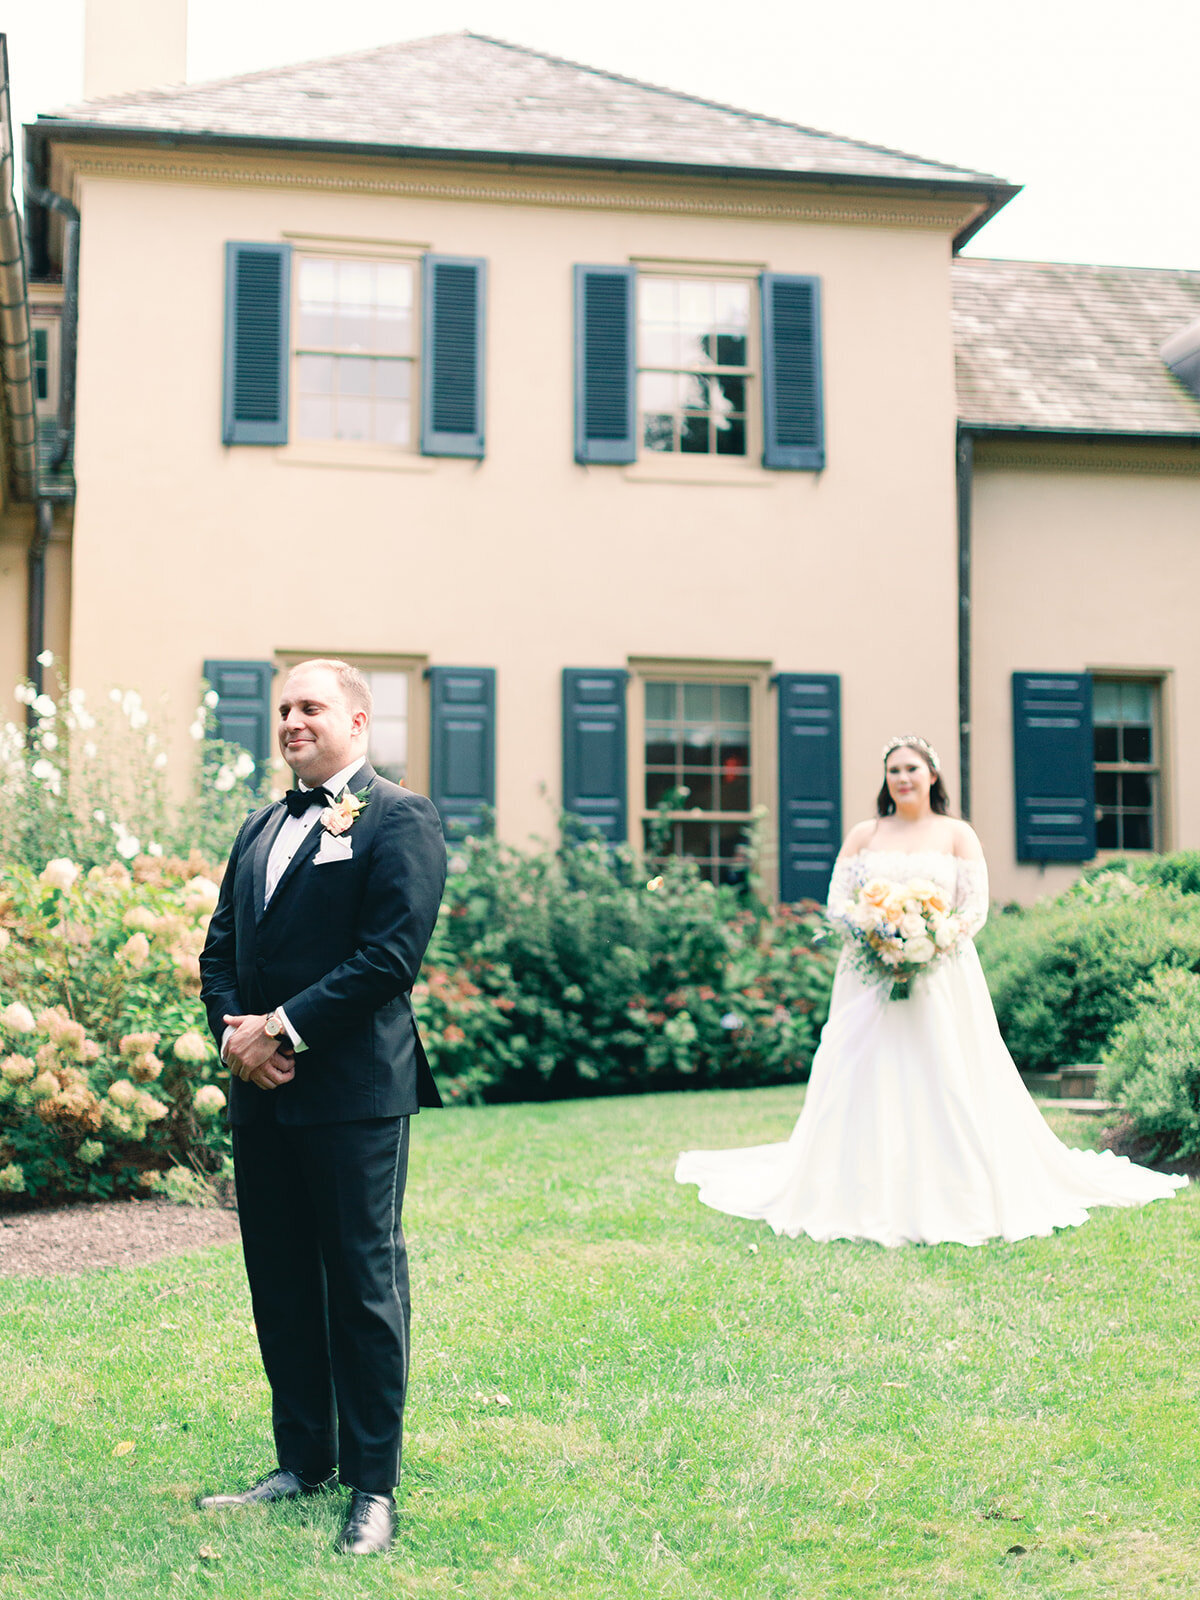 M+G_Belmont Manor_Morning_Luxury_Wedding_Photo_Clear Sky Images-380